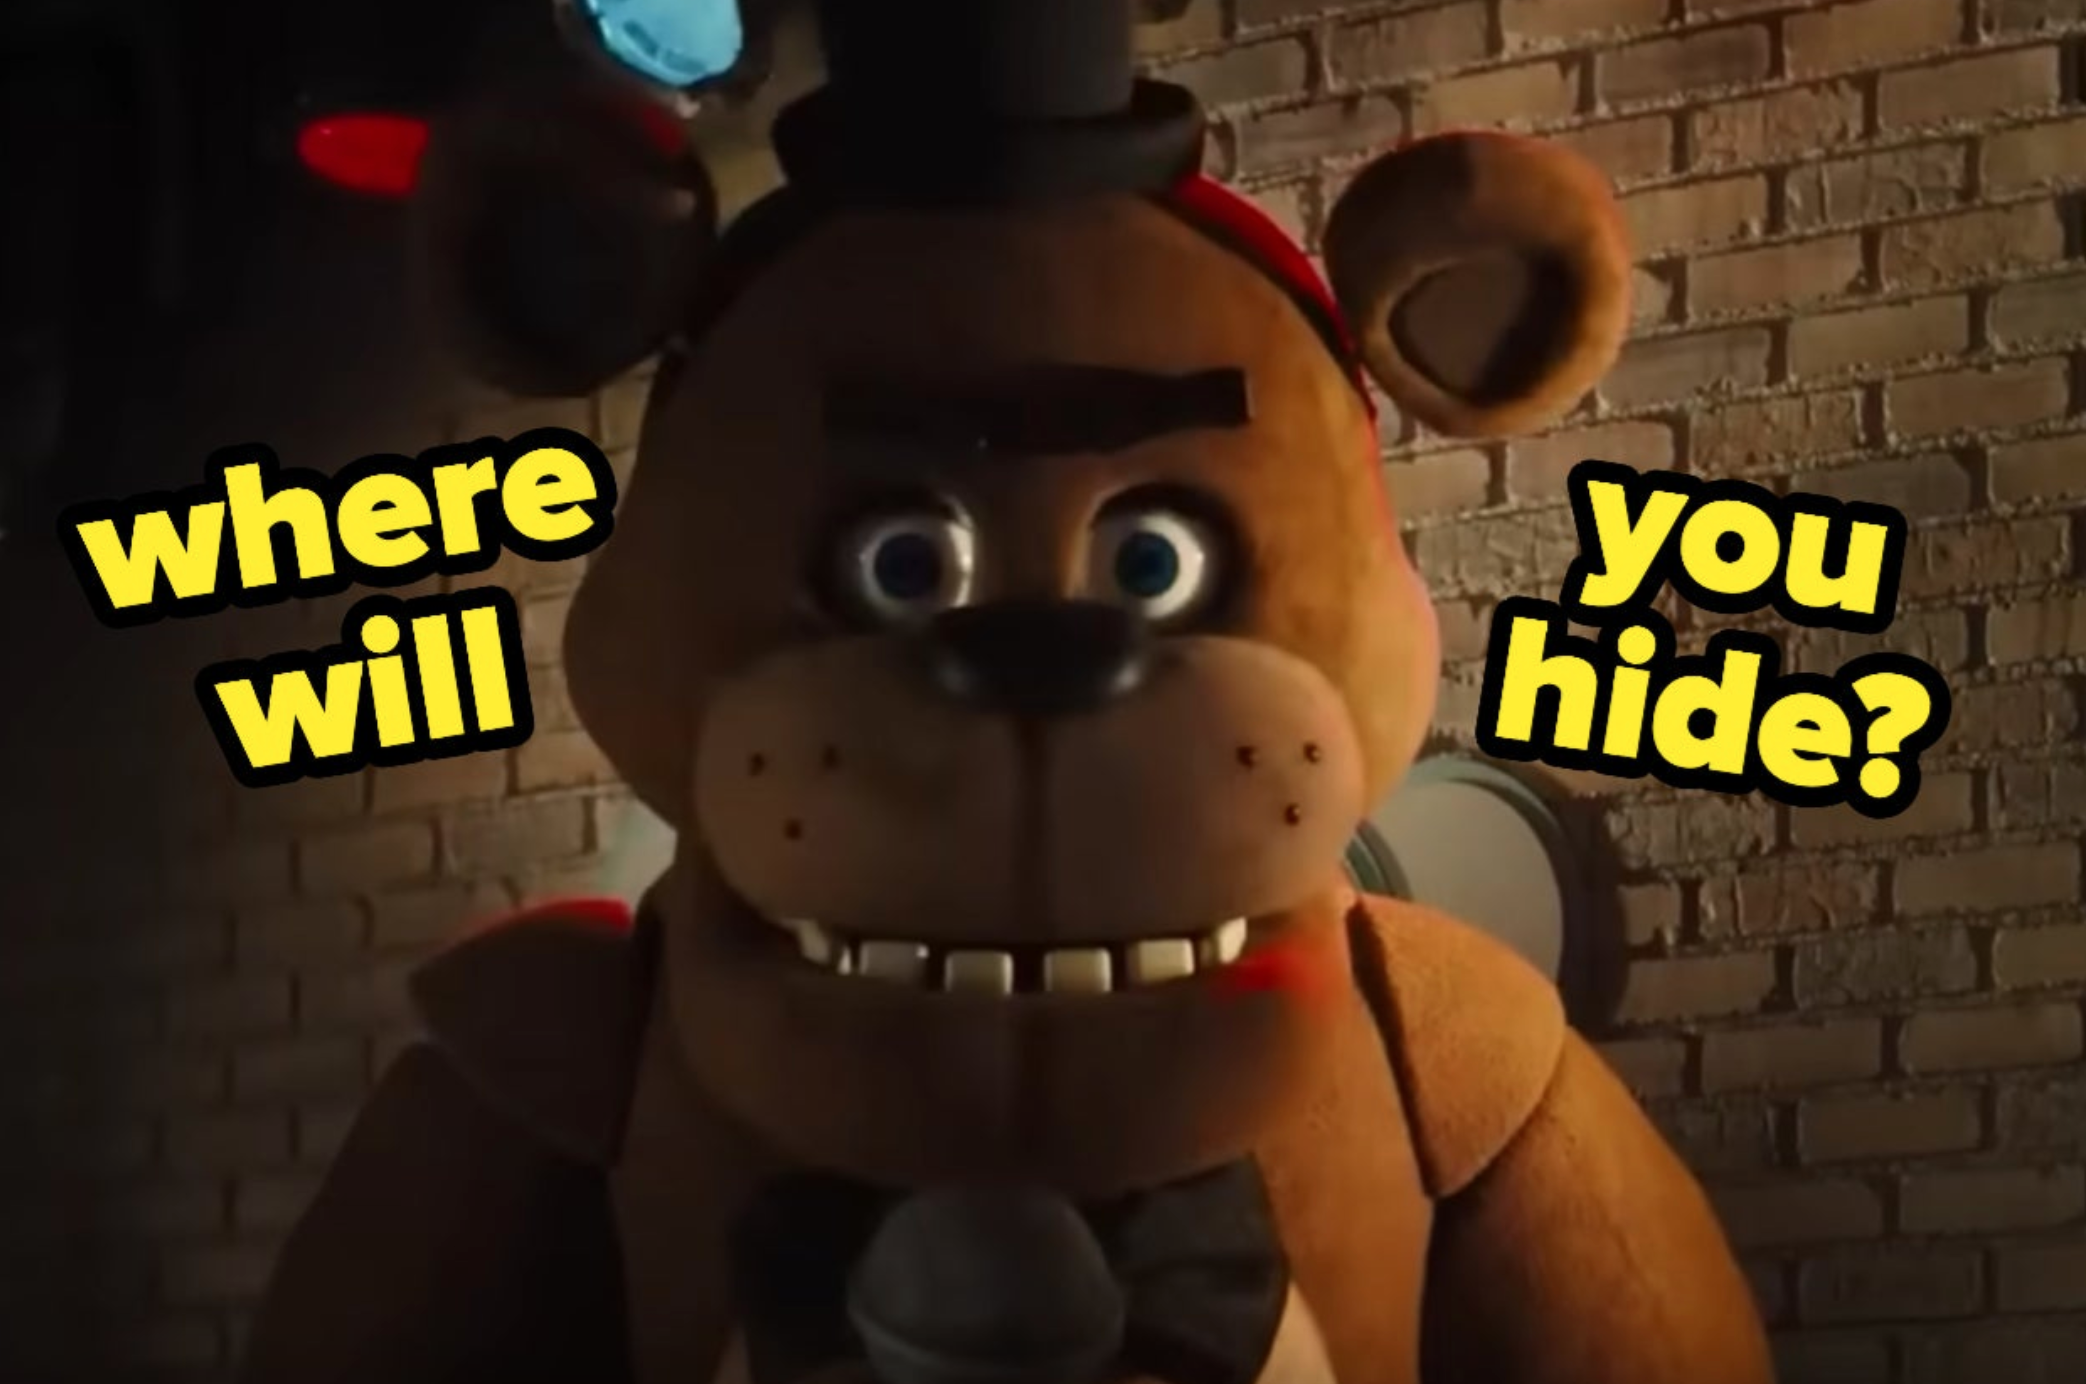 Quiz: Which FNAF Character Are You?